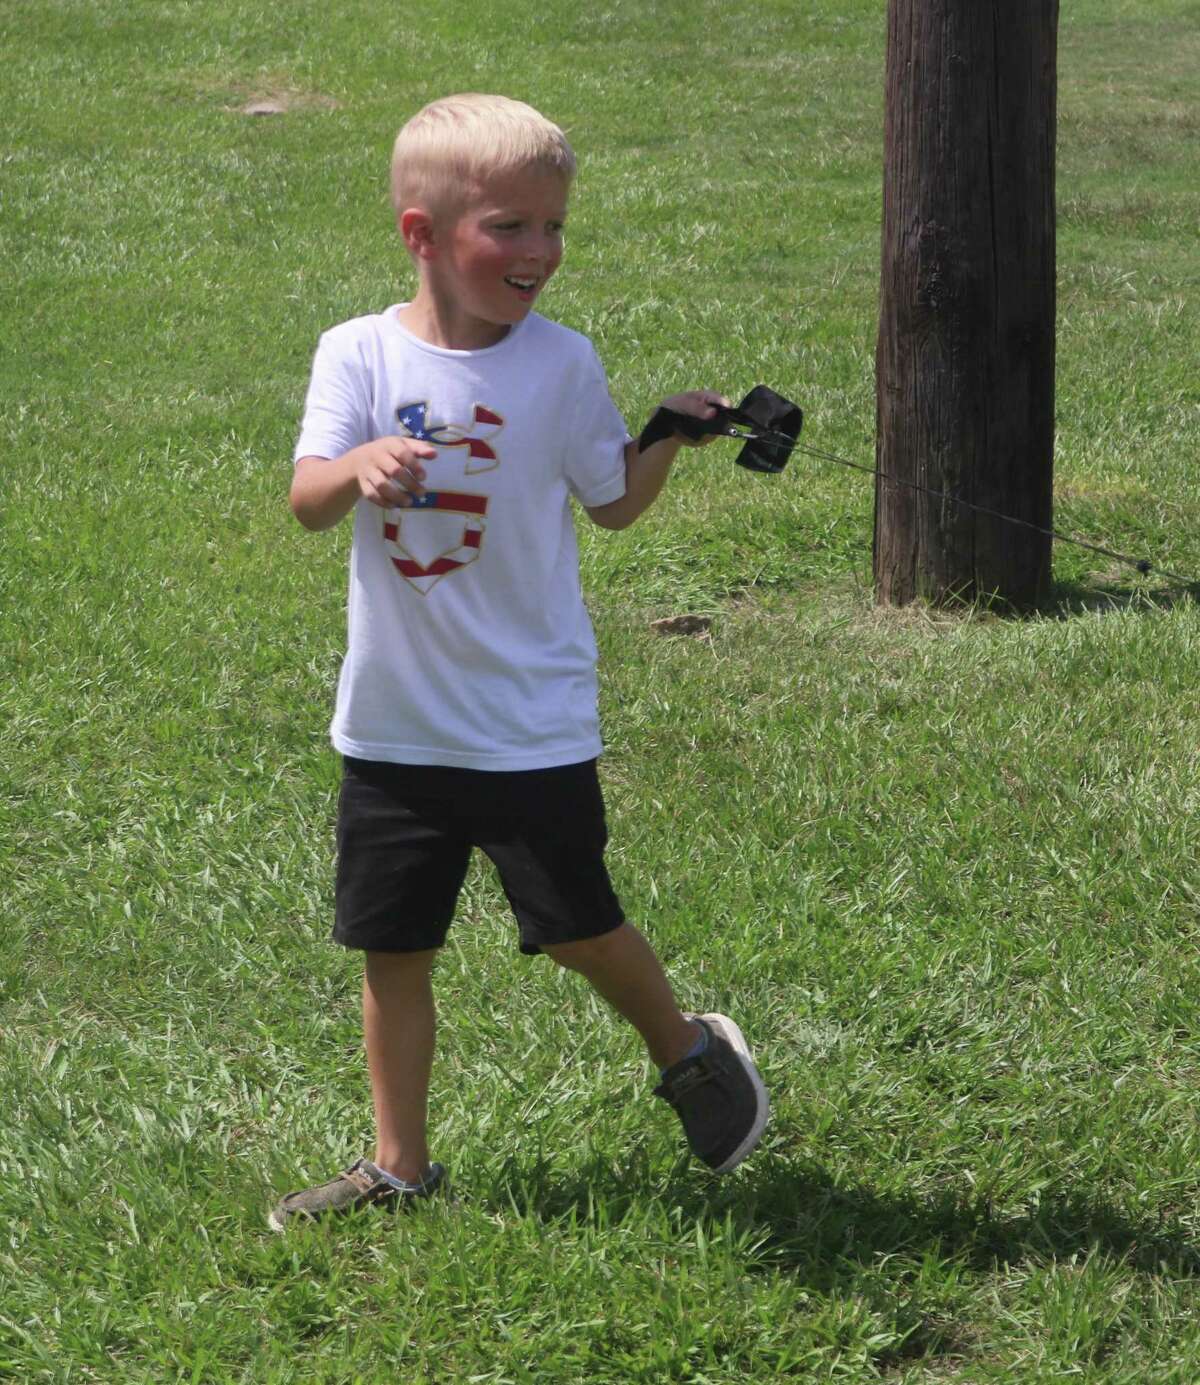 Ripkin Desadier delights playing with a baseball on a string at the Ruth Minchen Athletic Complex Thursday.  Ripkin is the 6-year-old brother of Deanville all-star second baseman Tavin Desadier.